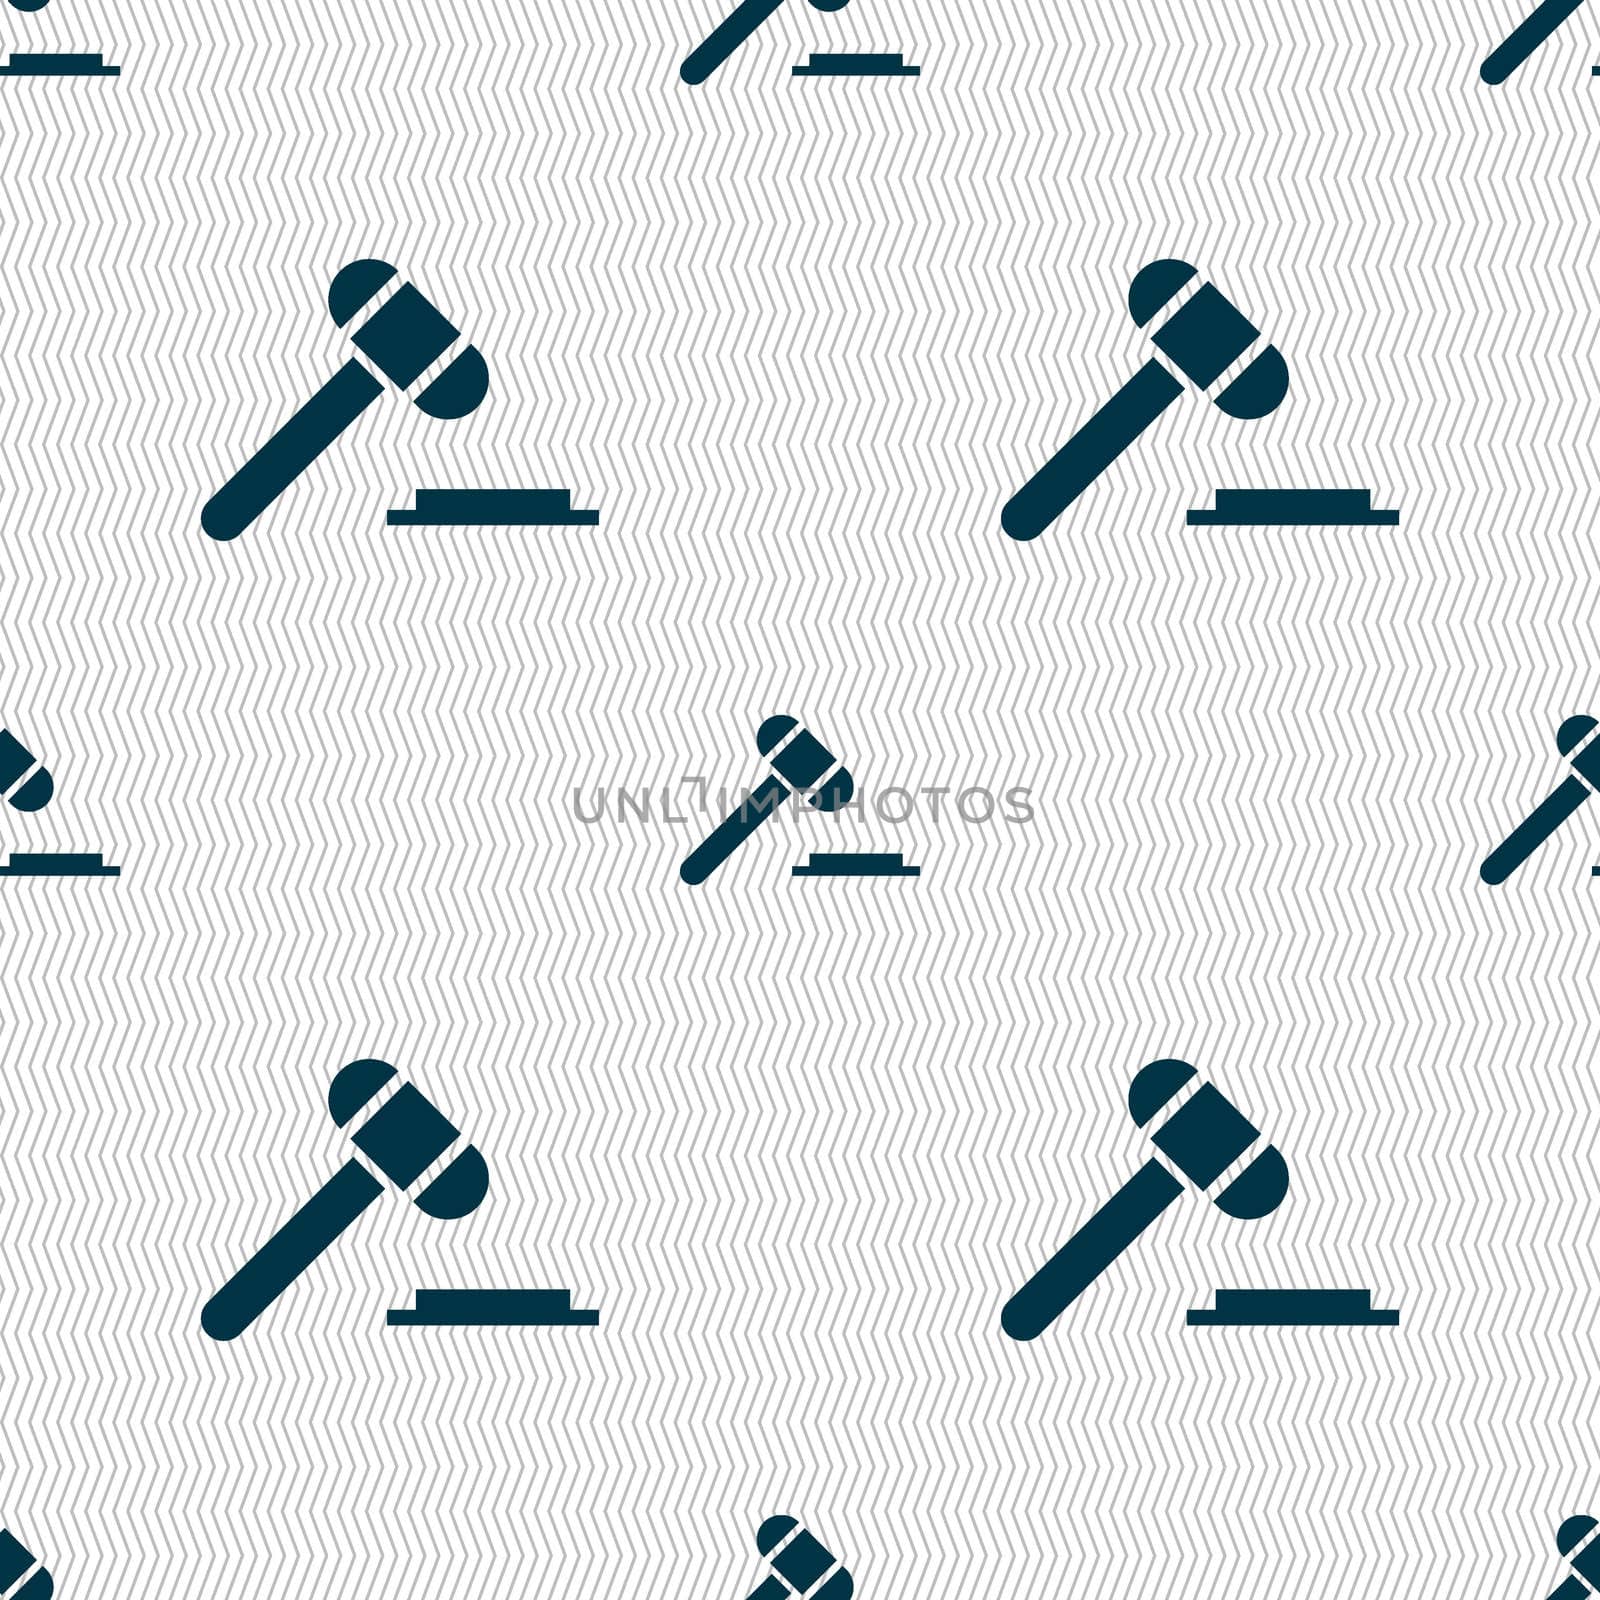 judge hammer icon. Seamless abstract background with geometric shapes. illustration